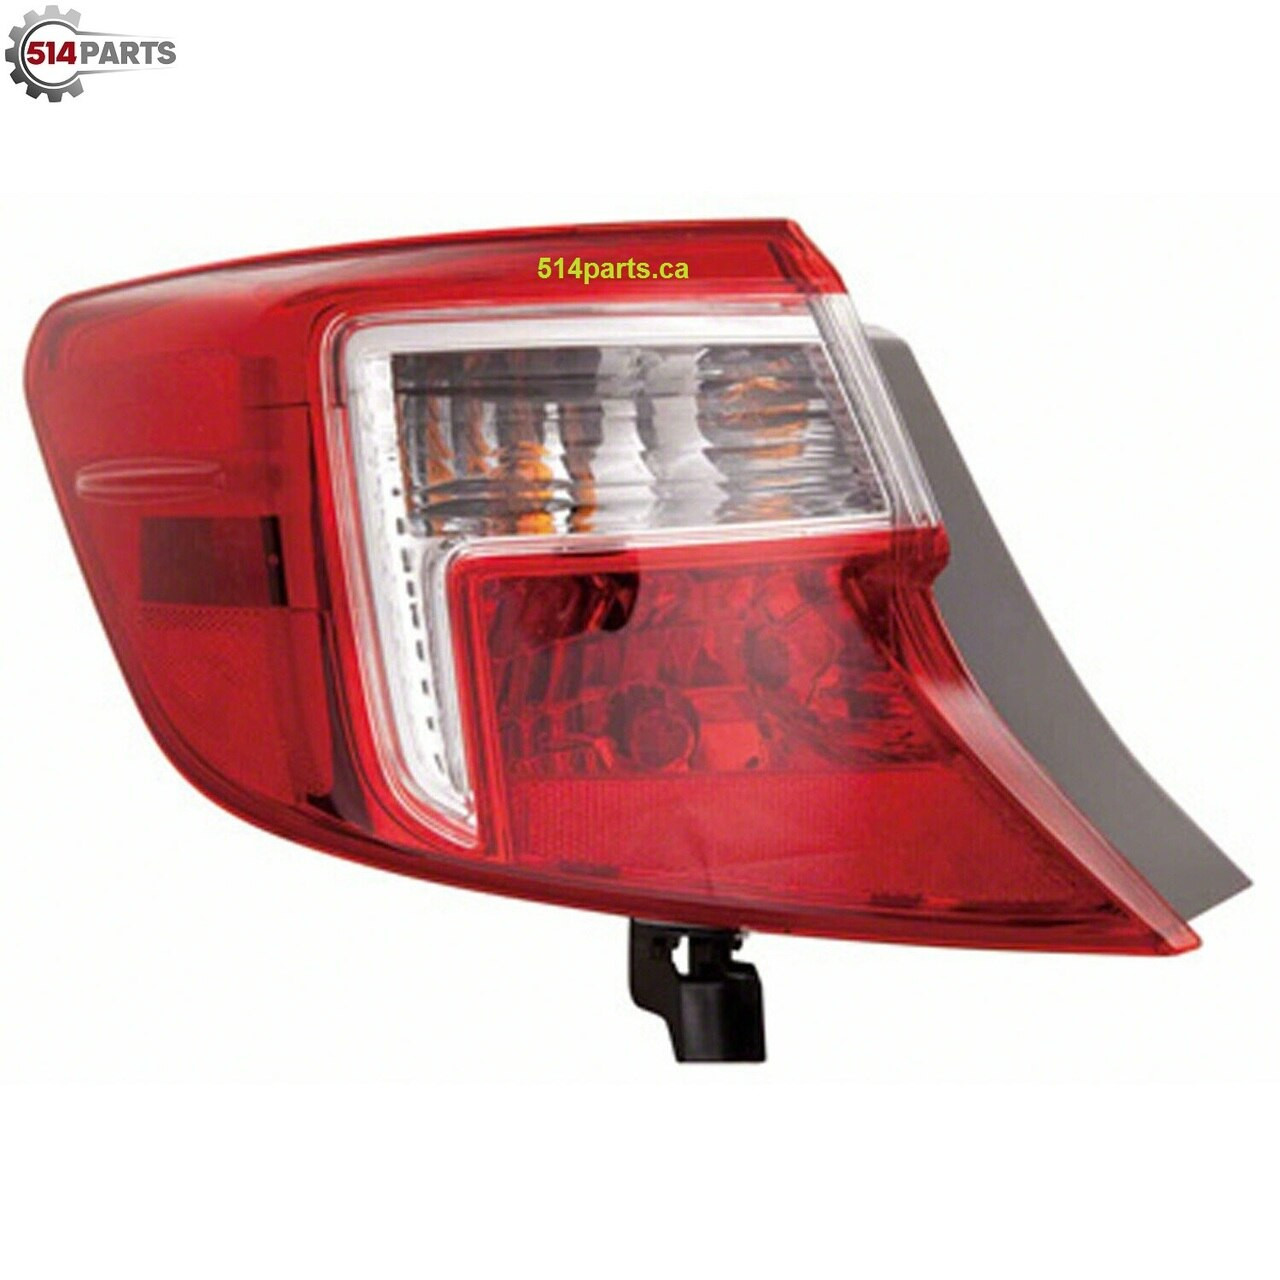 2012 - 2014 TOYOTA CAMRY and CAMRY HYBRID TAIL LIGHTS - PHARES ARRIERE